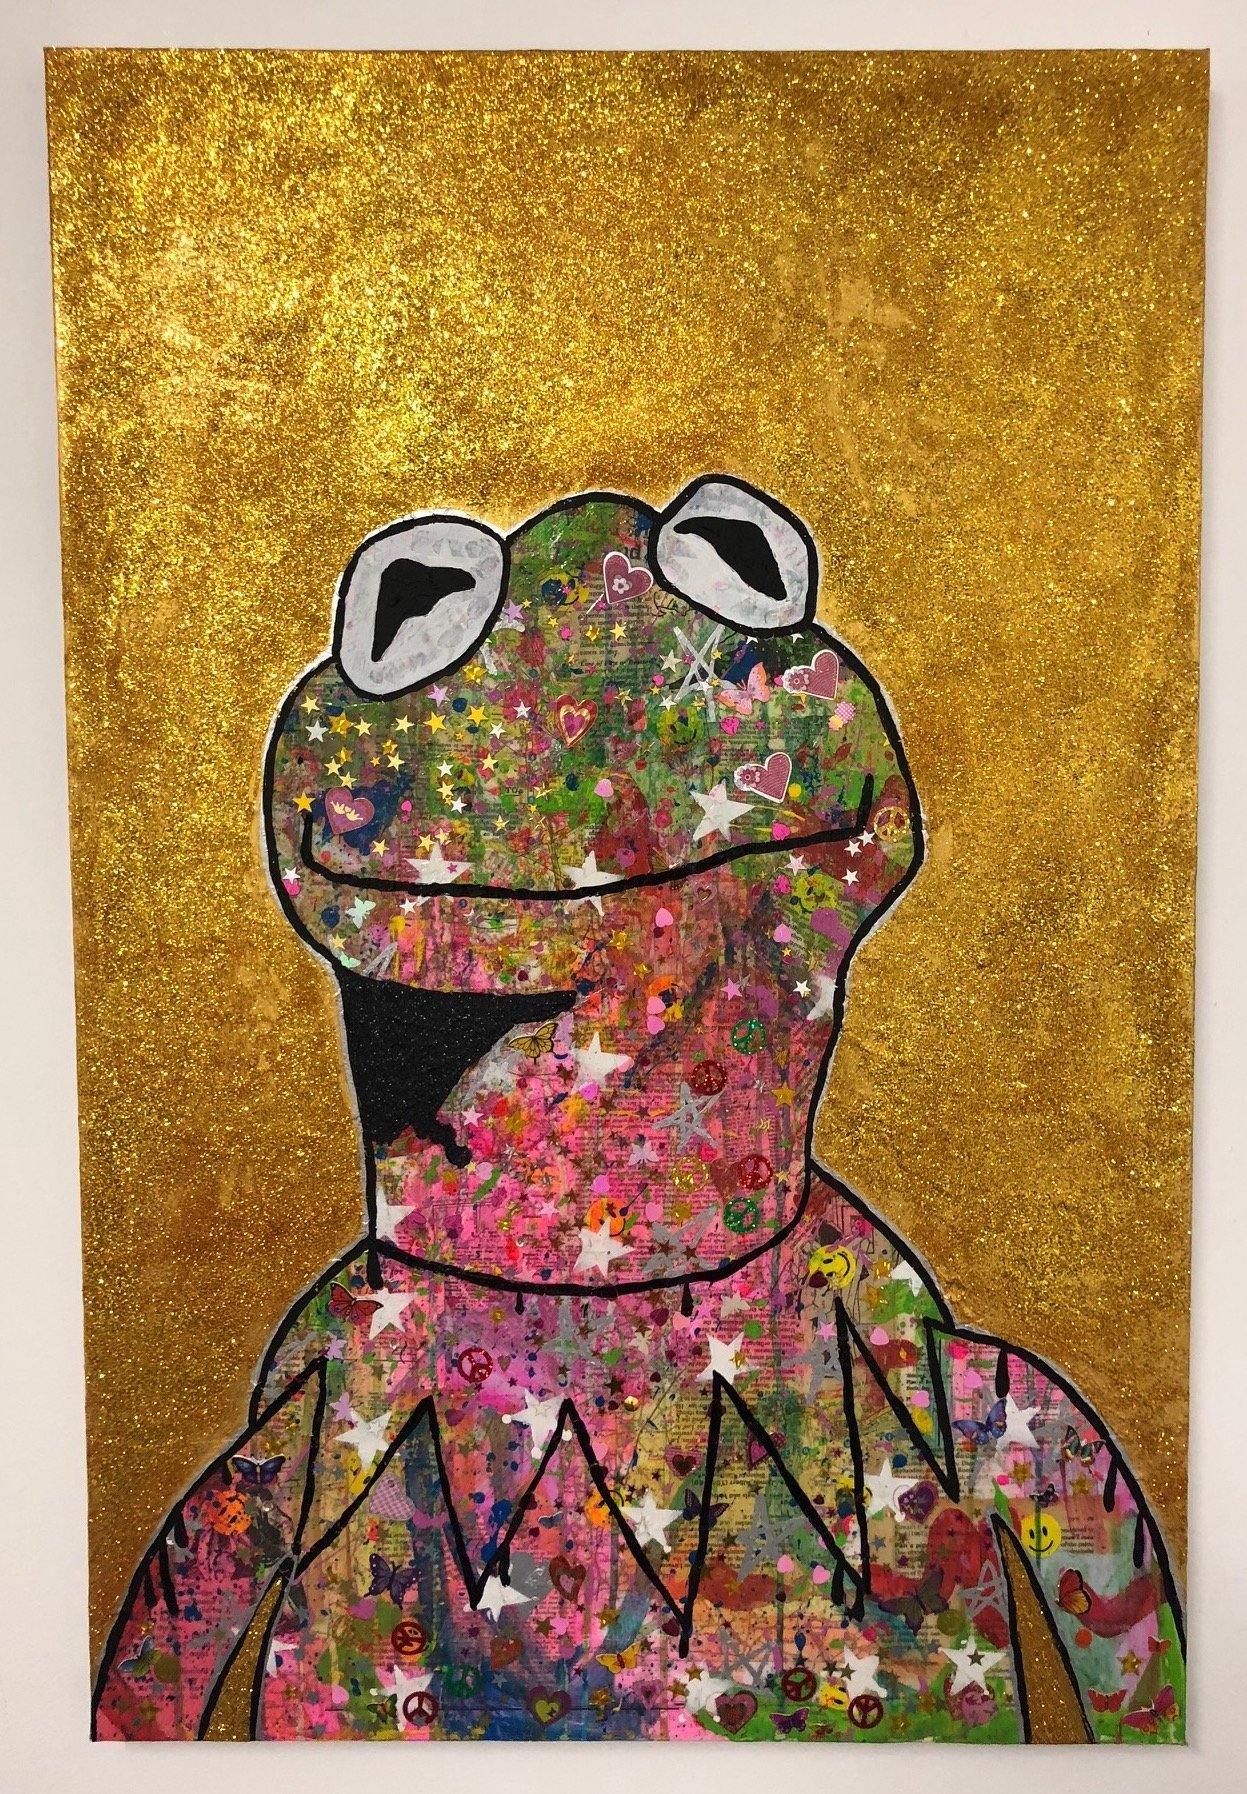 Peace Frog by Barrie J Davies 2018, mixed media on canvas, Unframed, 60cm x 100cm. Barrie J Davies is an Artist - Pop Art and Street art inspired Artist based in Brighton England UK - Pop Art Paintings, Street Art Prints & Editions available.